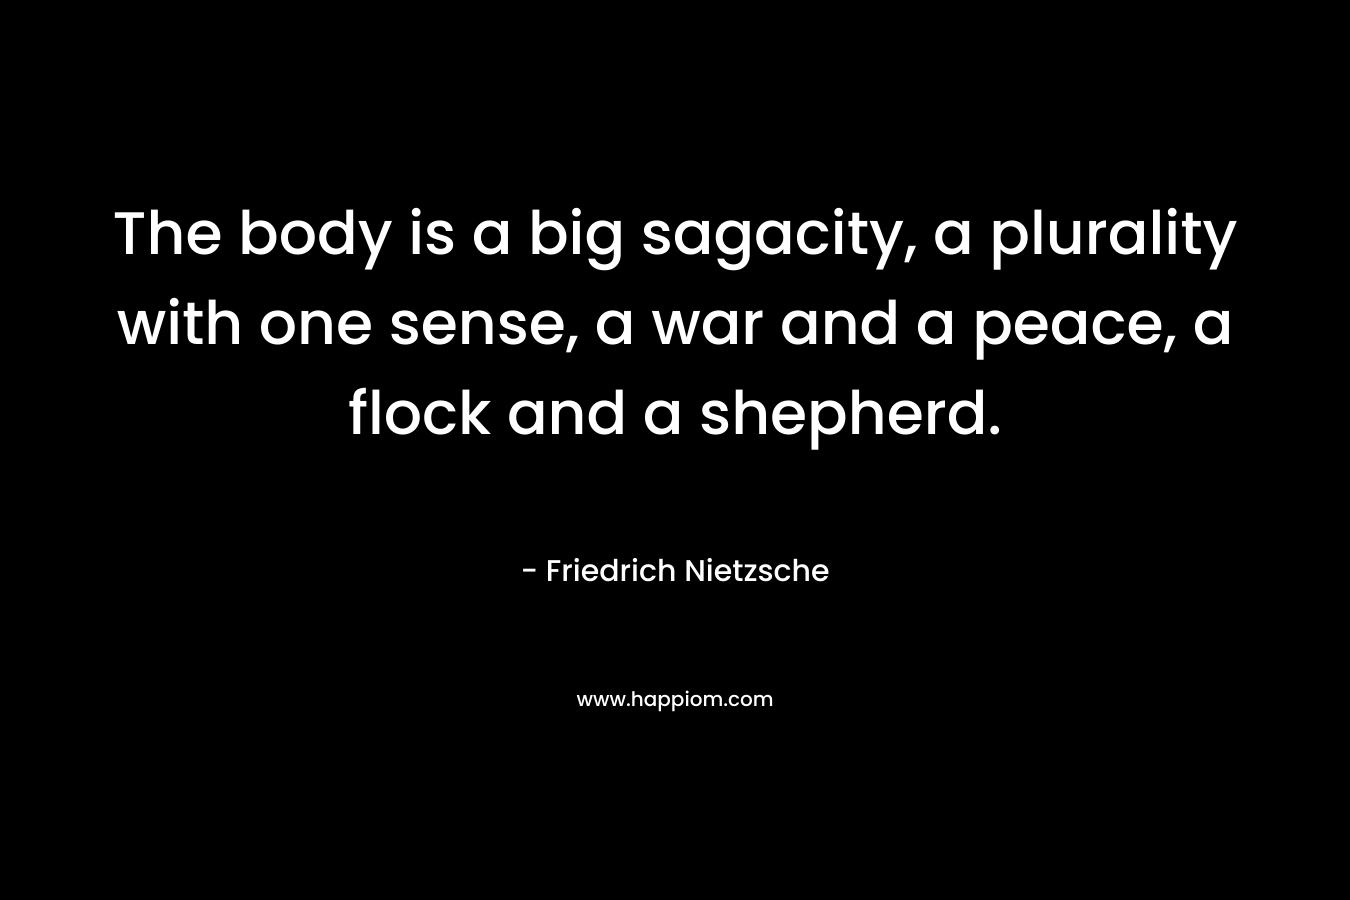 The body is a big sagacity, a plurality with one sense, a war and a peace, a flock and a shepherd. – Friedrich Nietzsche